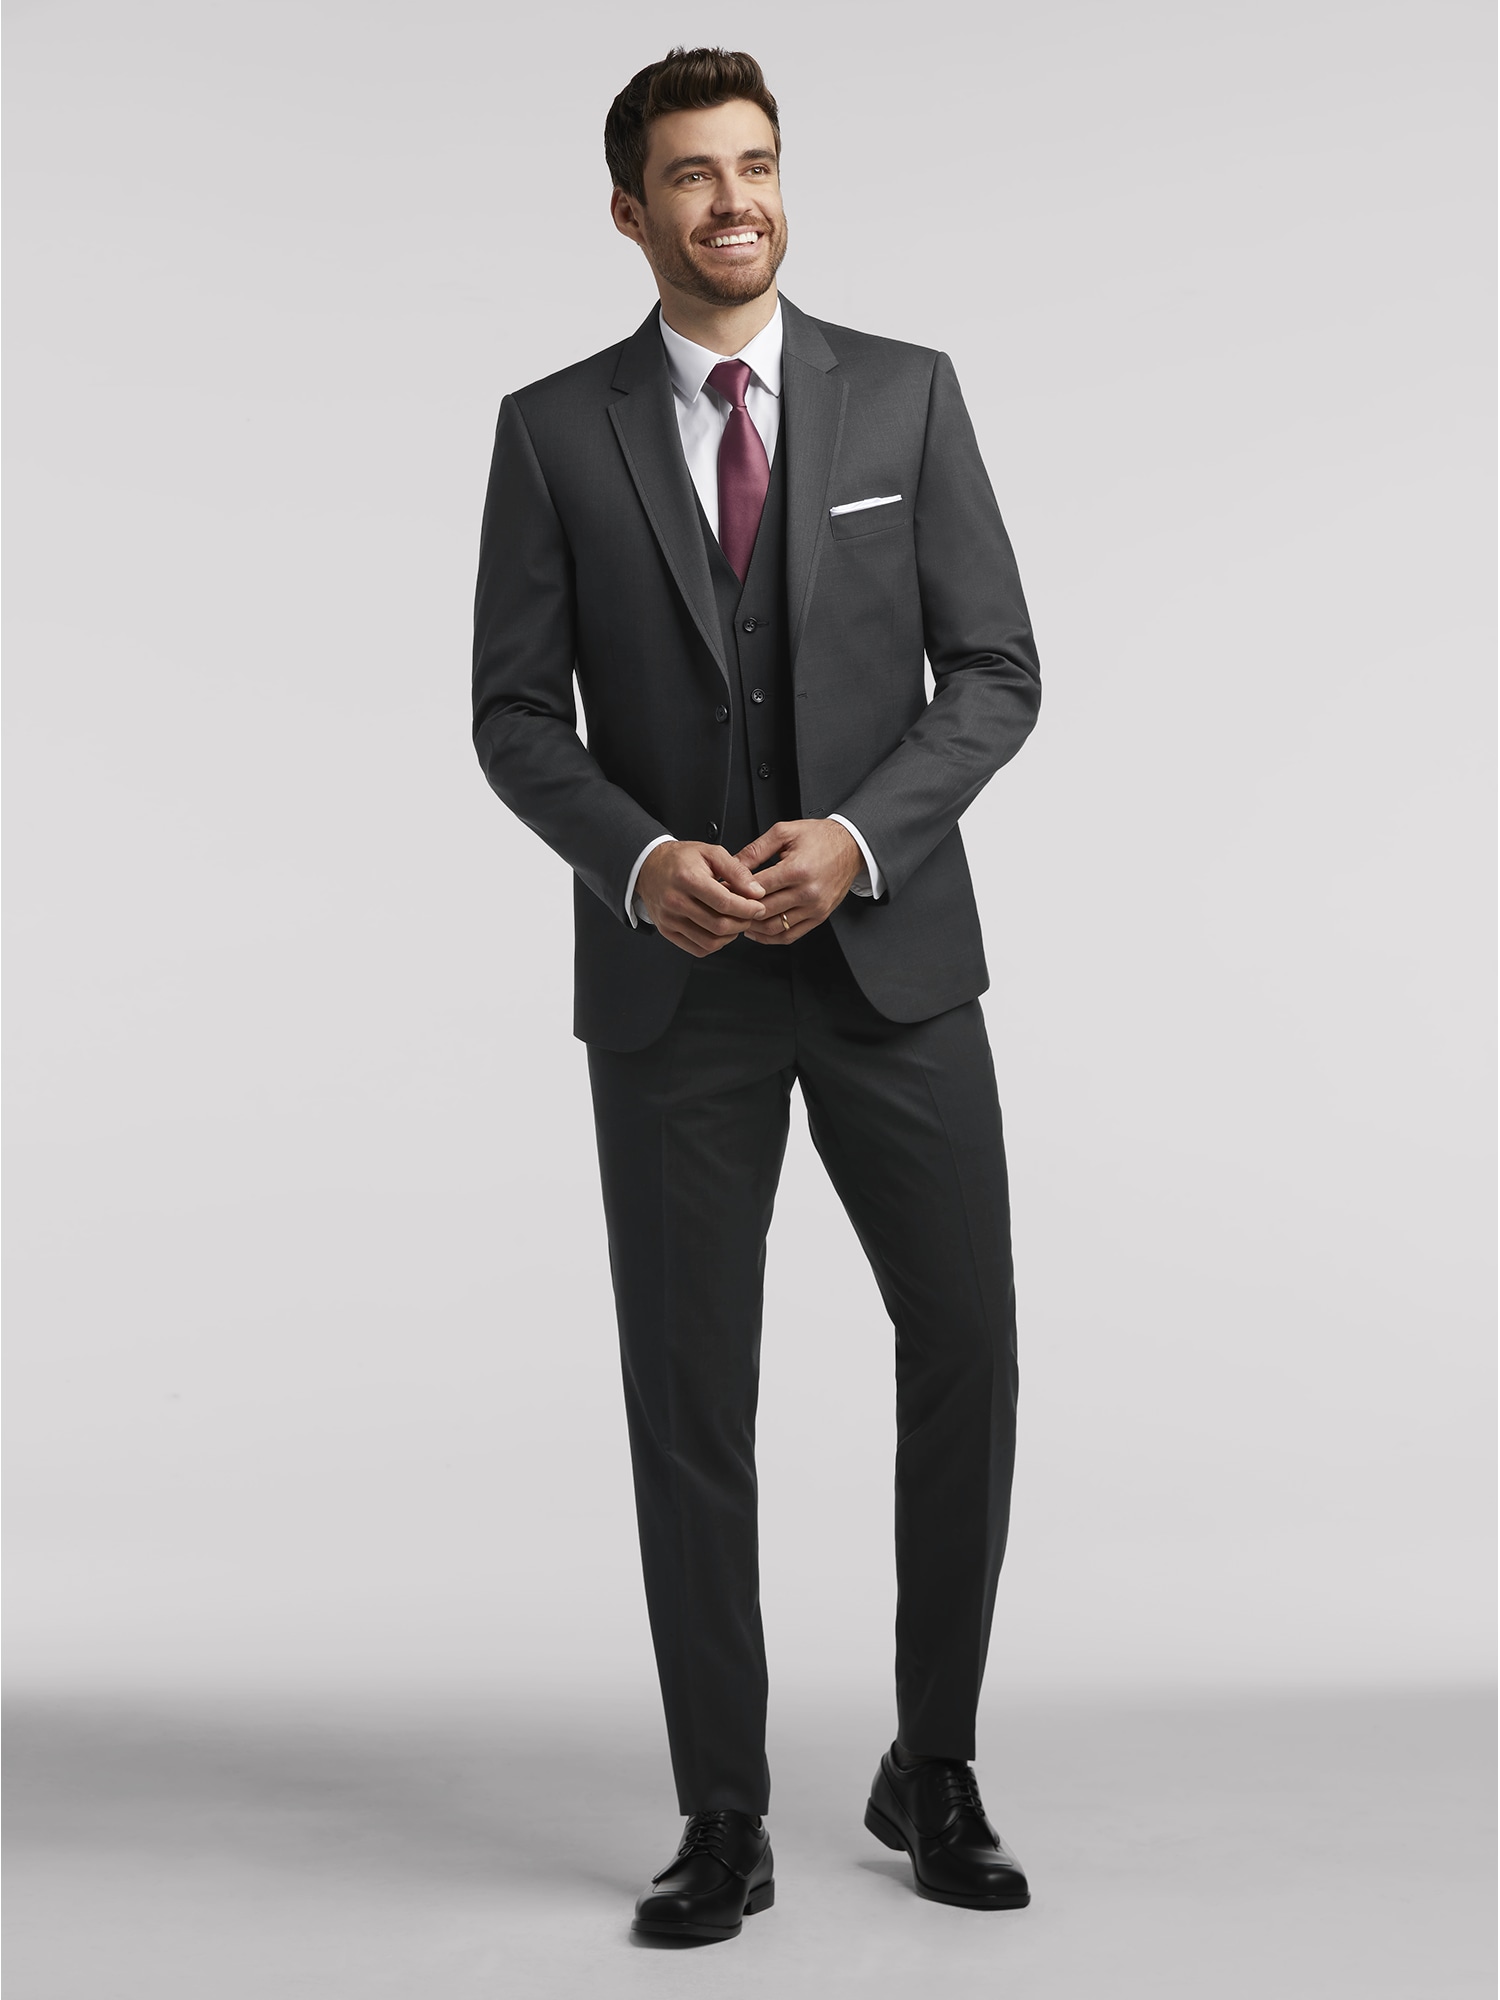 Wedding Suits and Tuxedos Styles